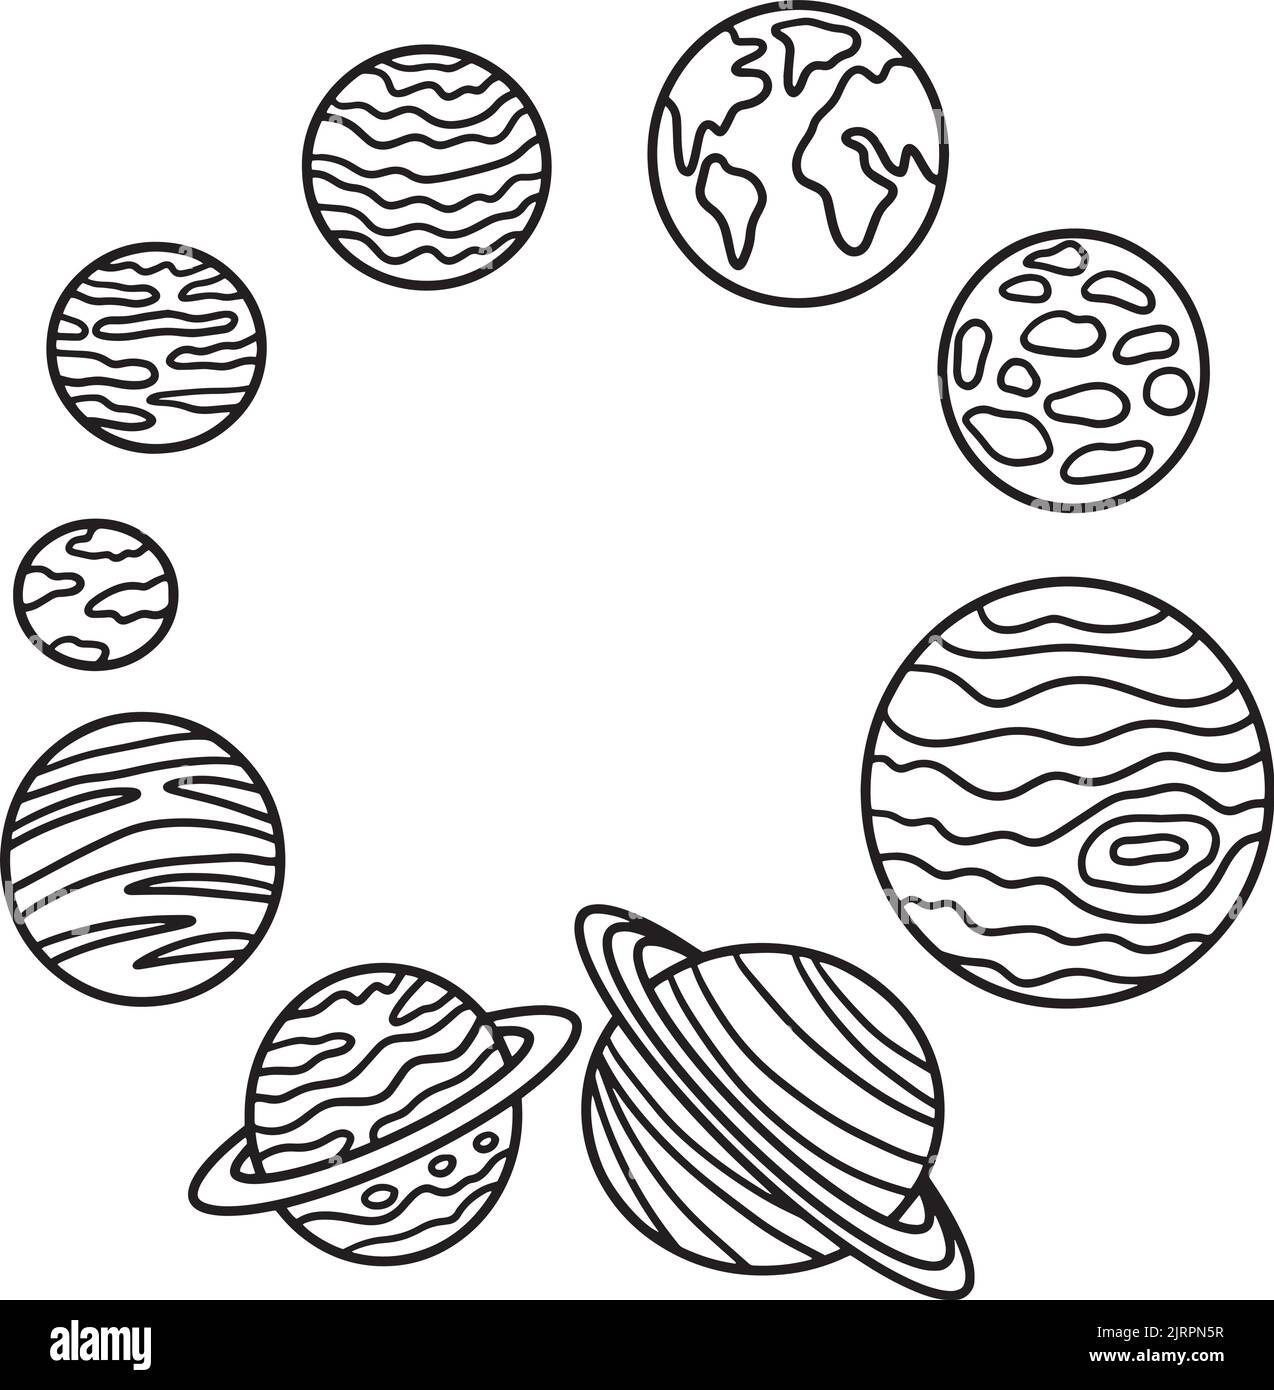 Solar System Isolated Coloring Page für Kinder Stock Vektor